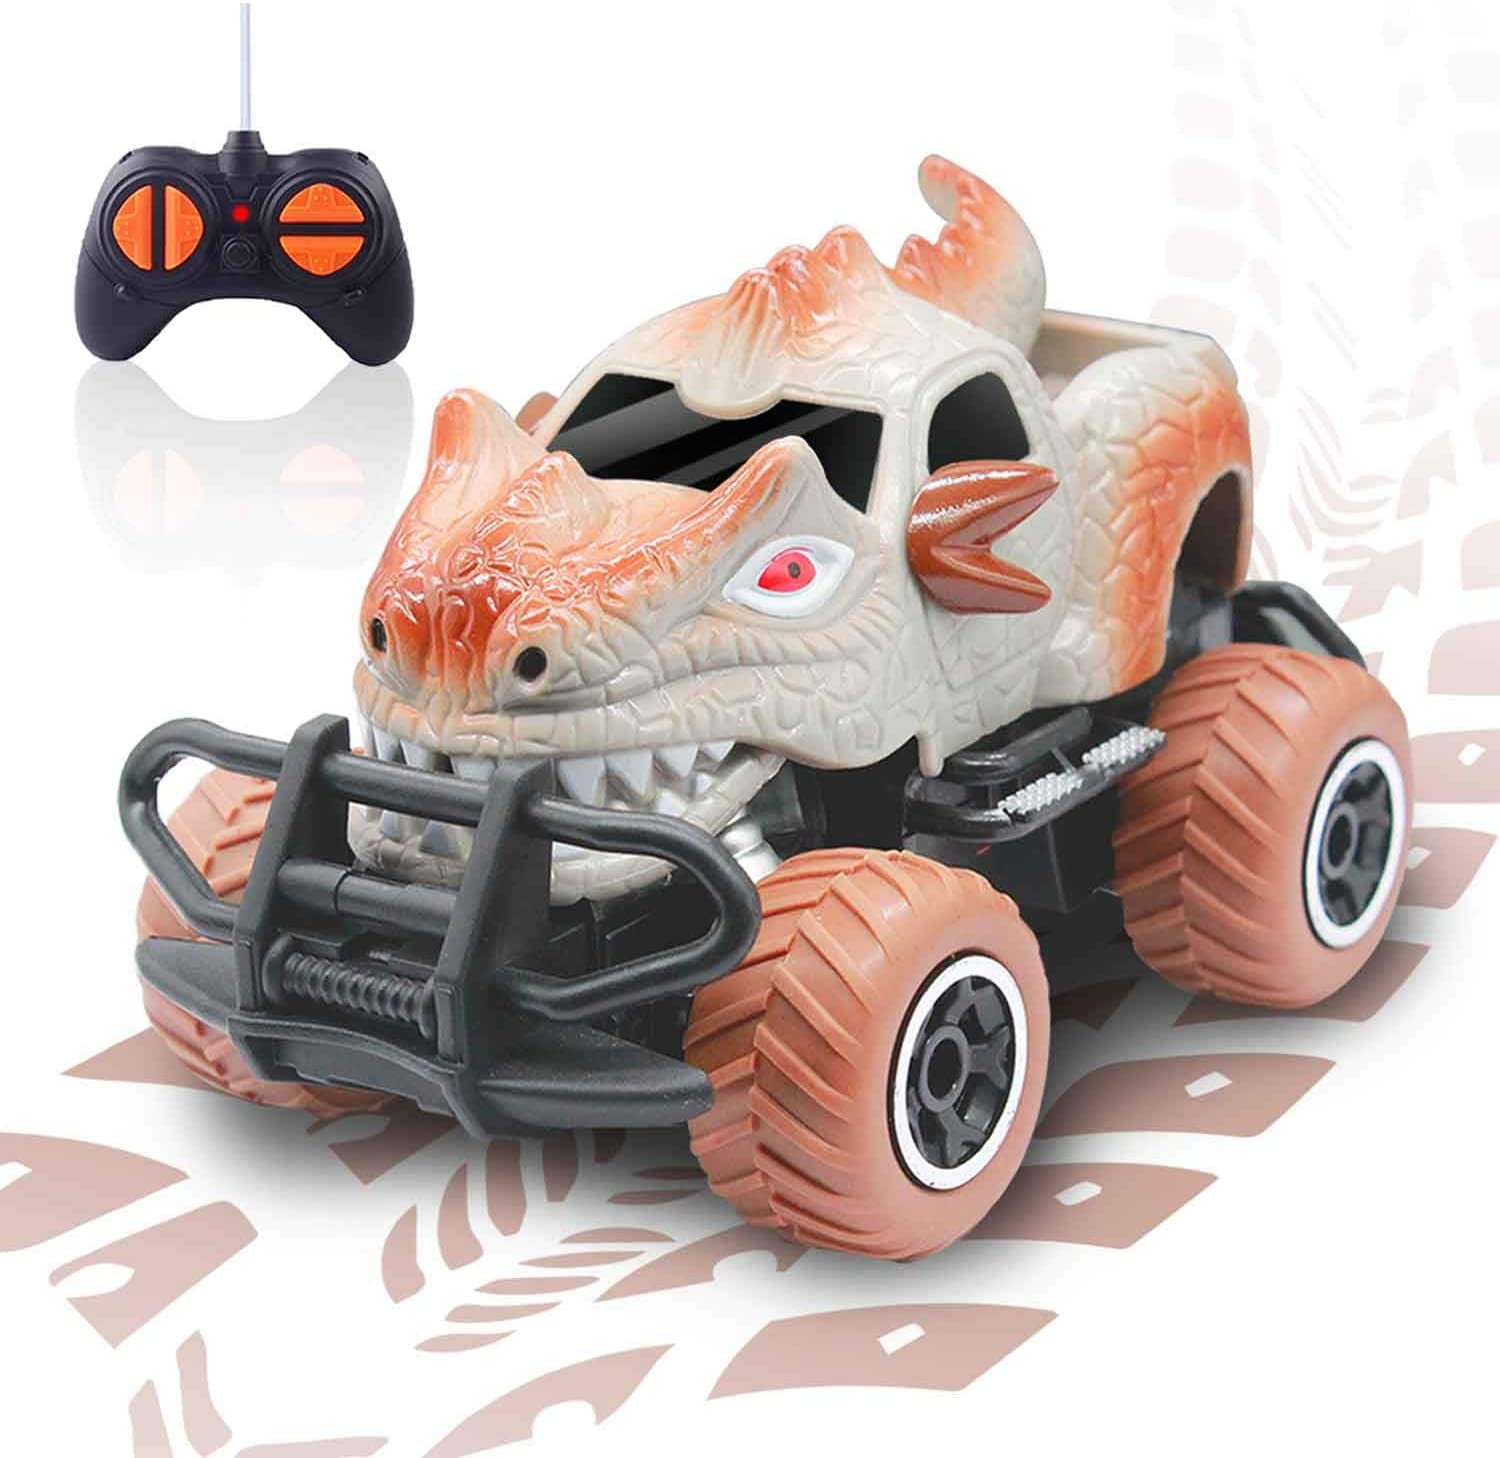 New Awesome Dinosaur Hunters All Terrain Vehicle Set Entertainment For Kids N-21 